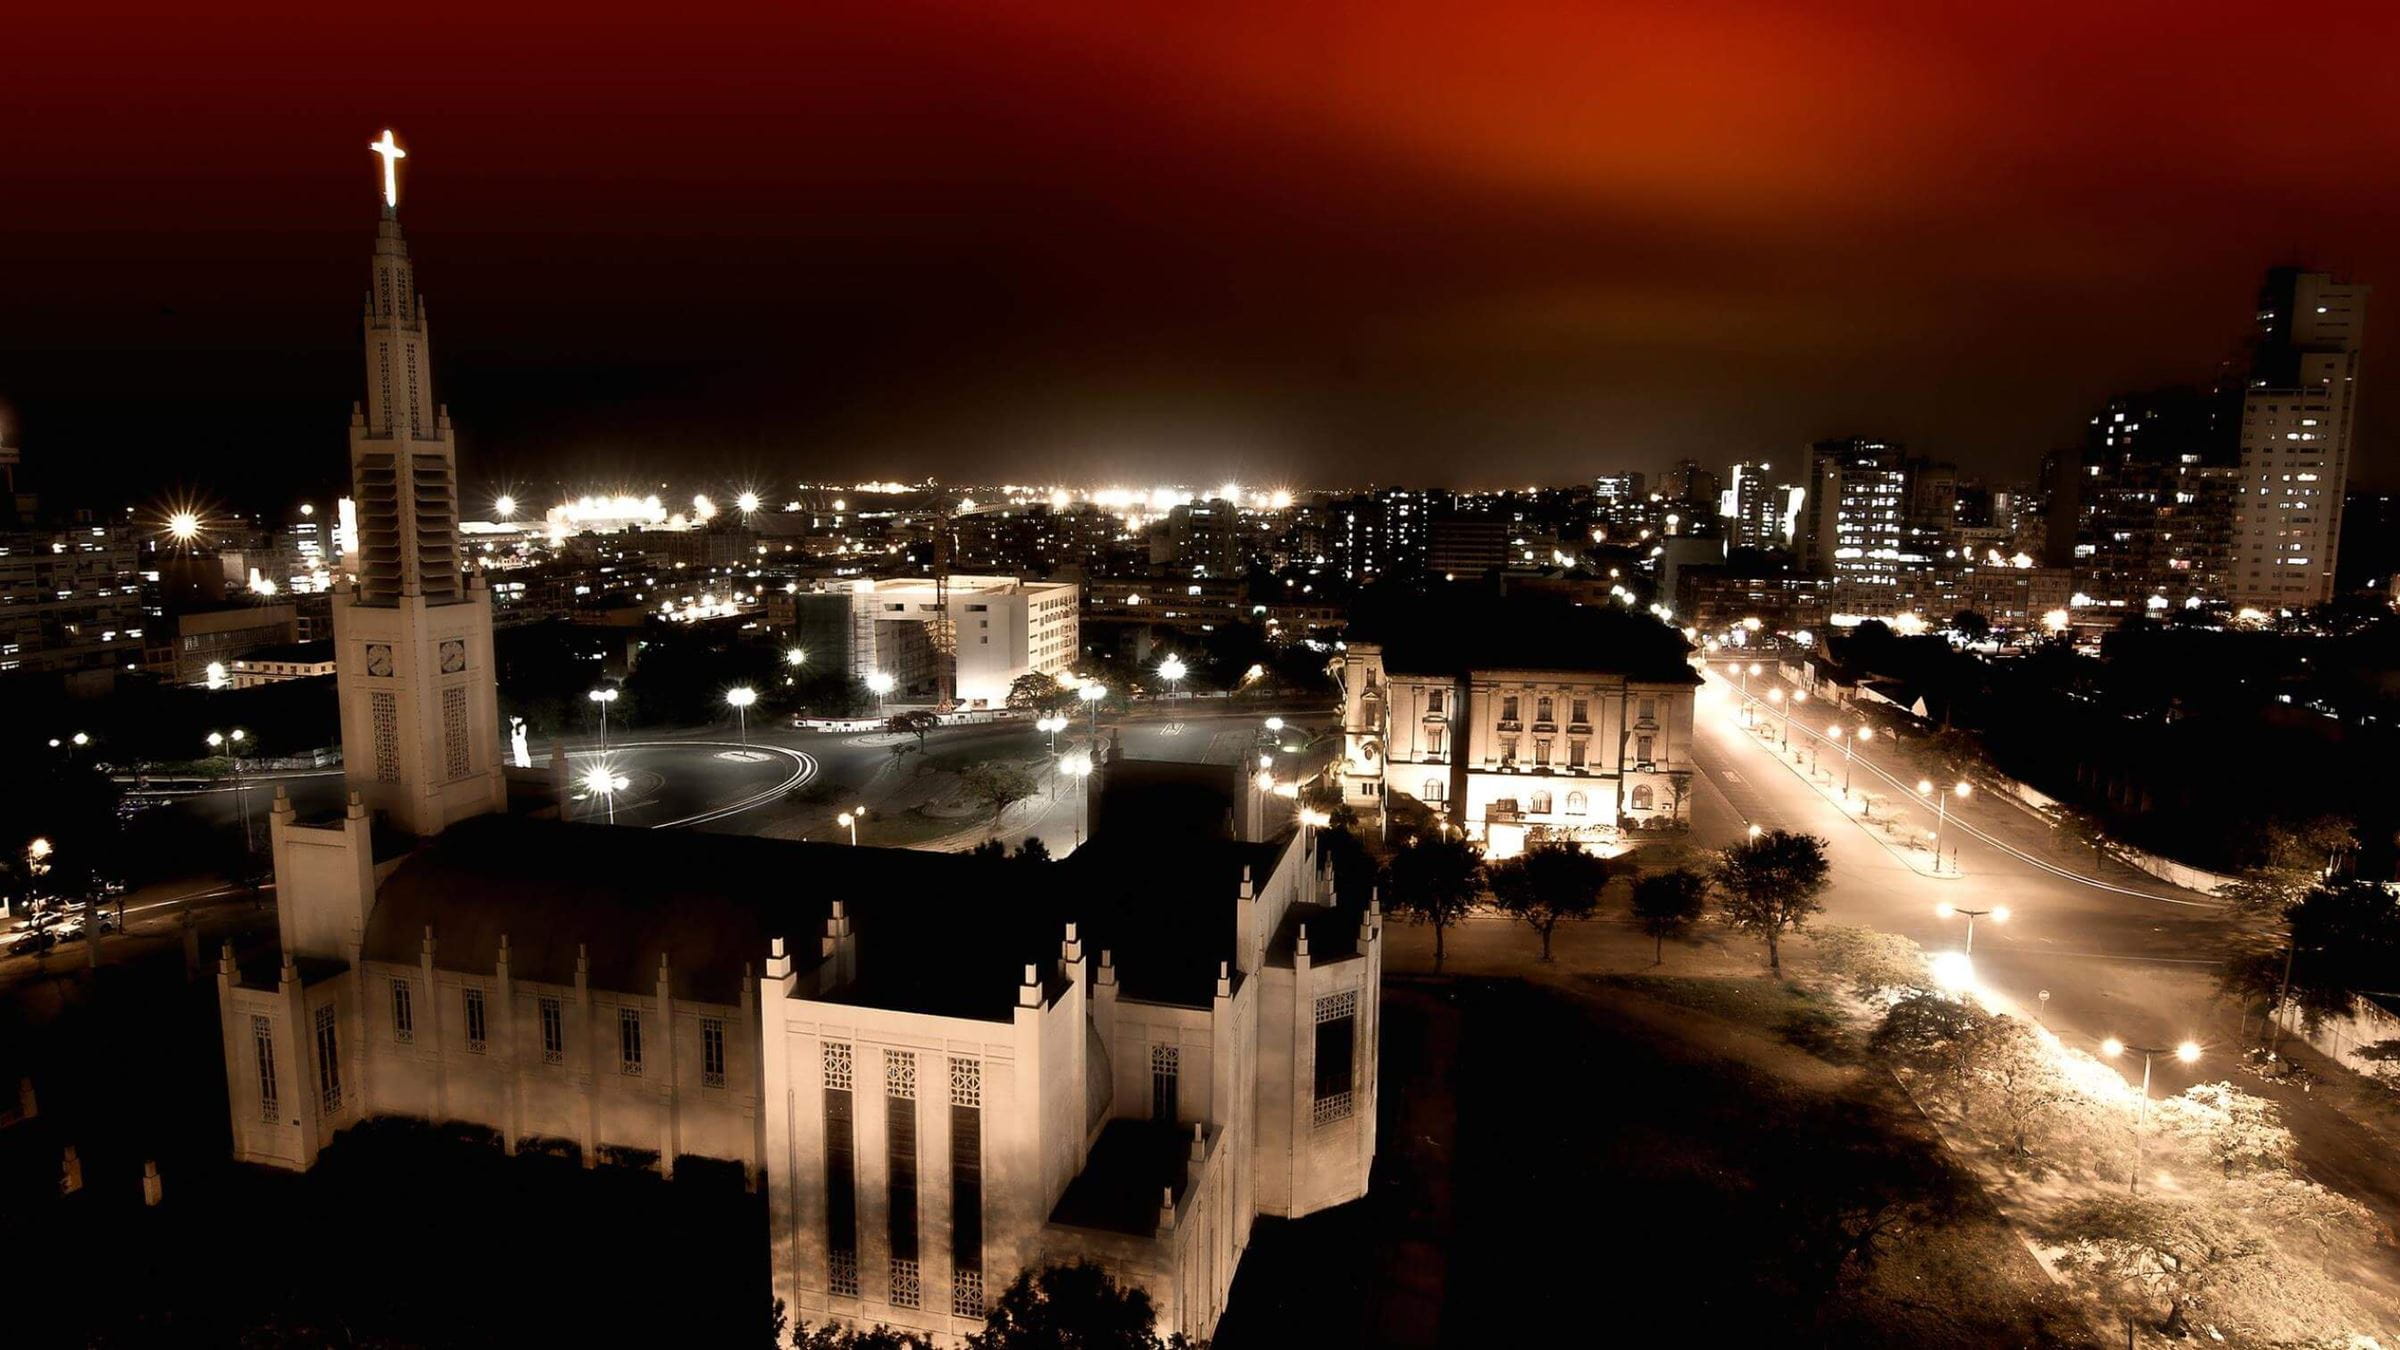 Mozambique capital at night